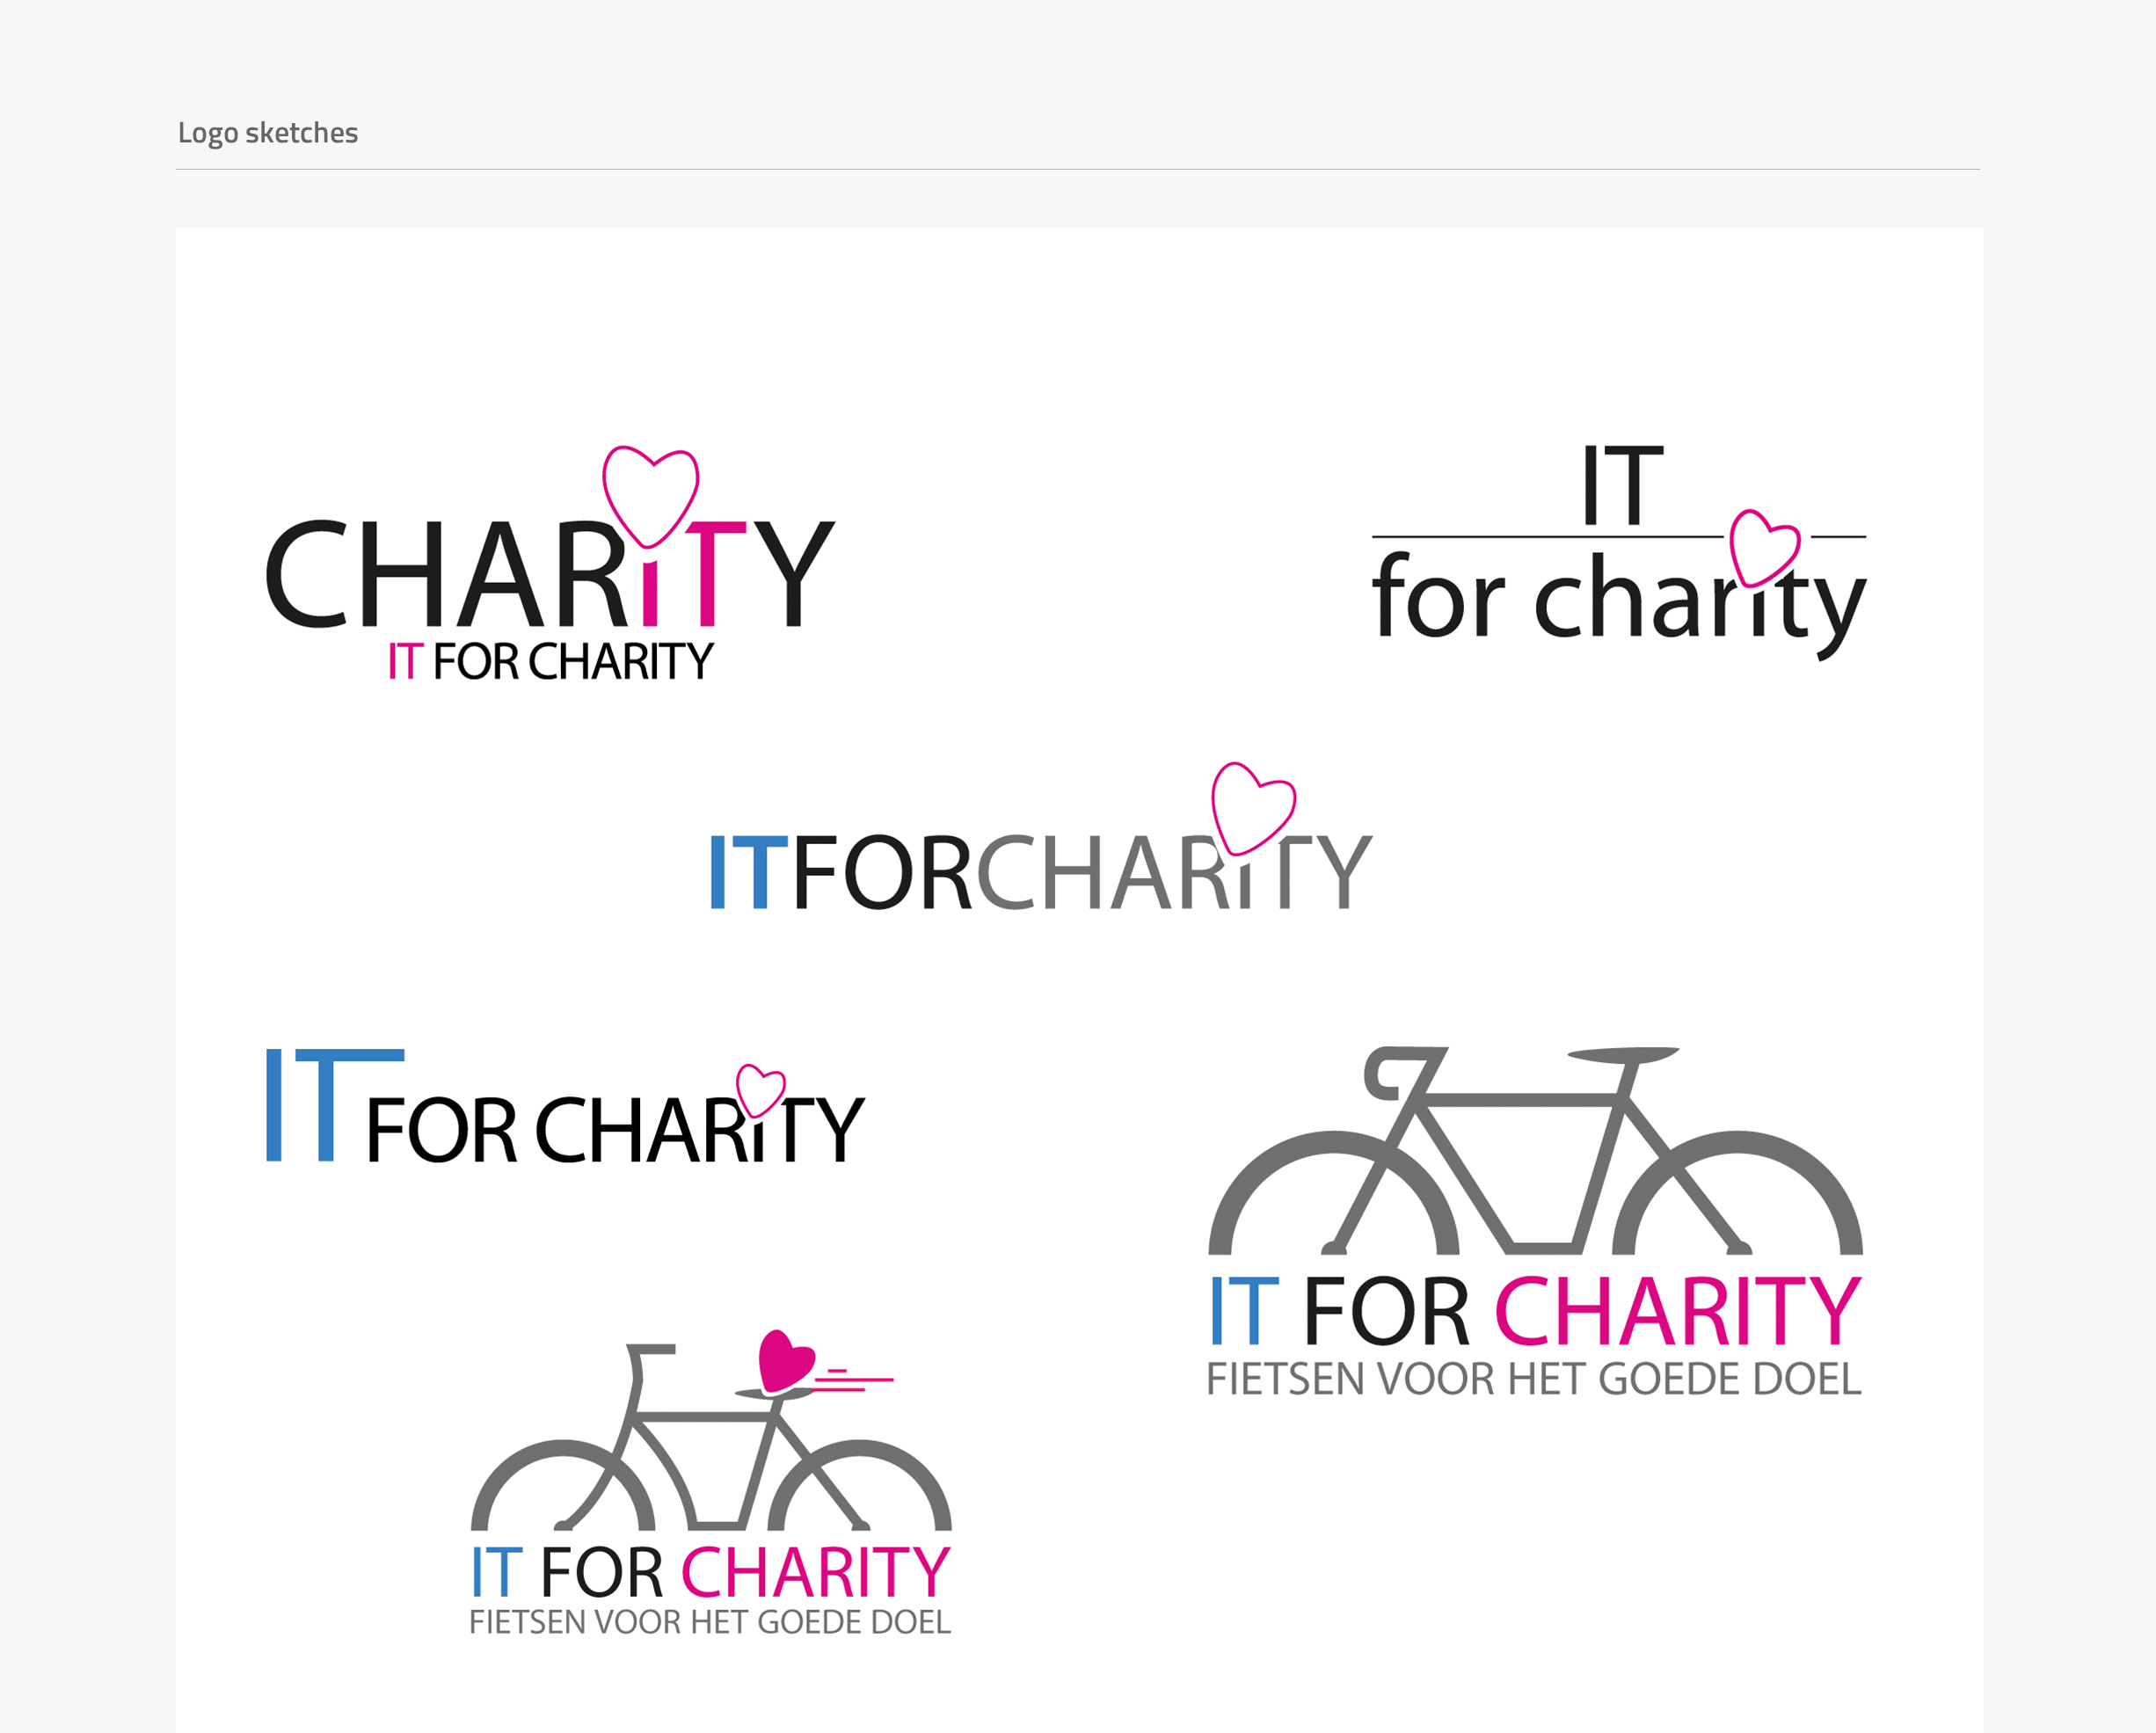 IT for Charity website - logo sketches